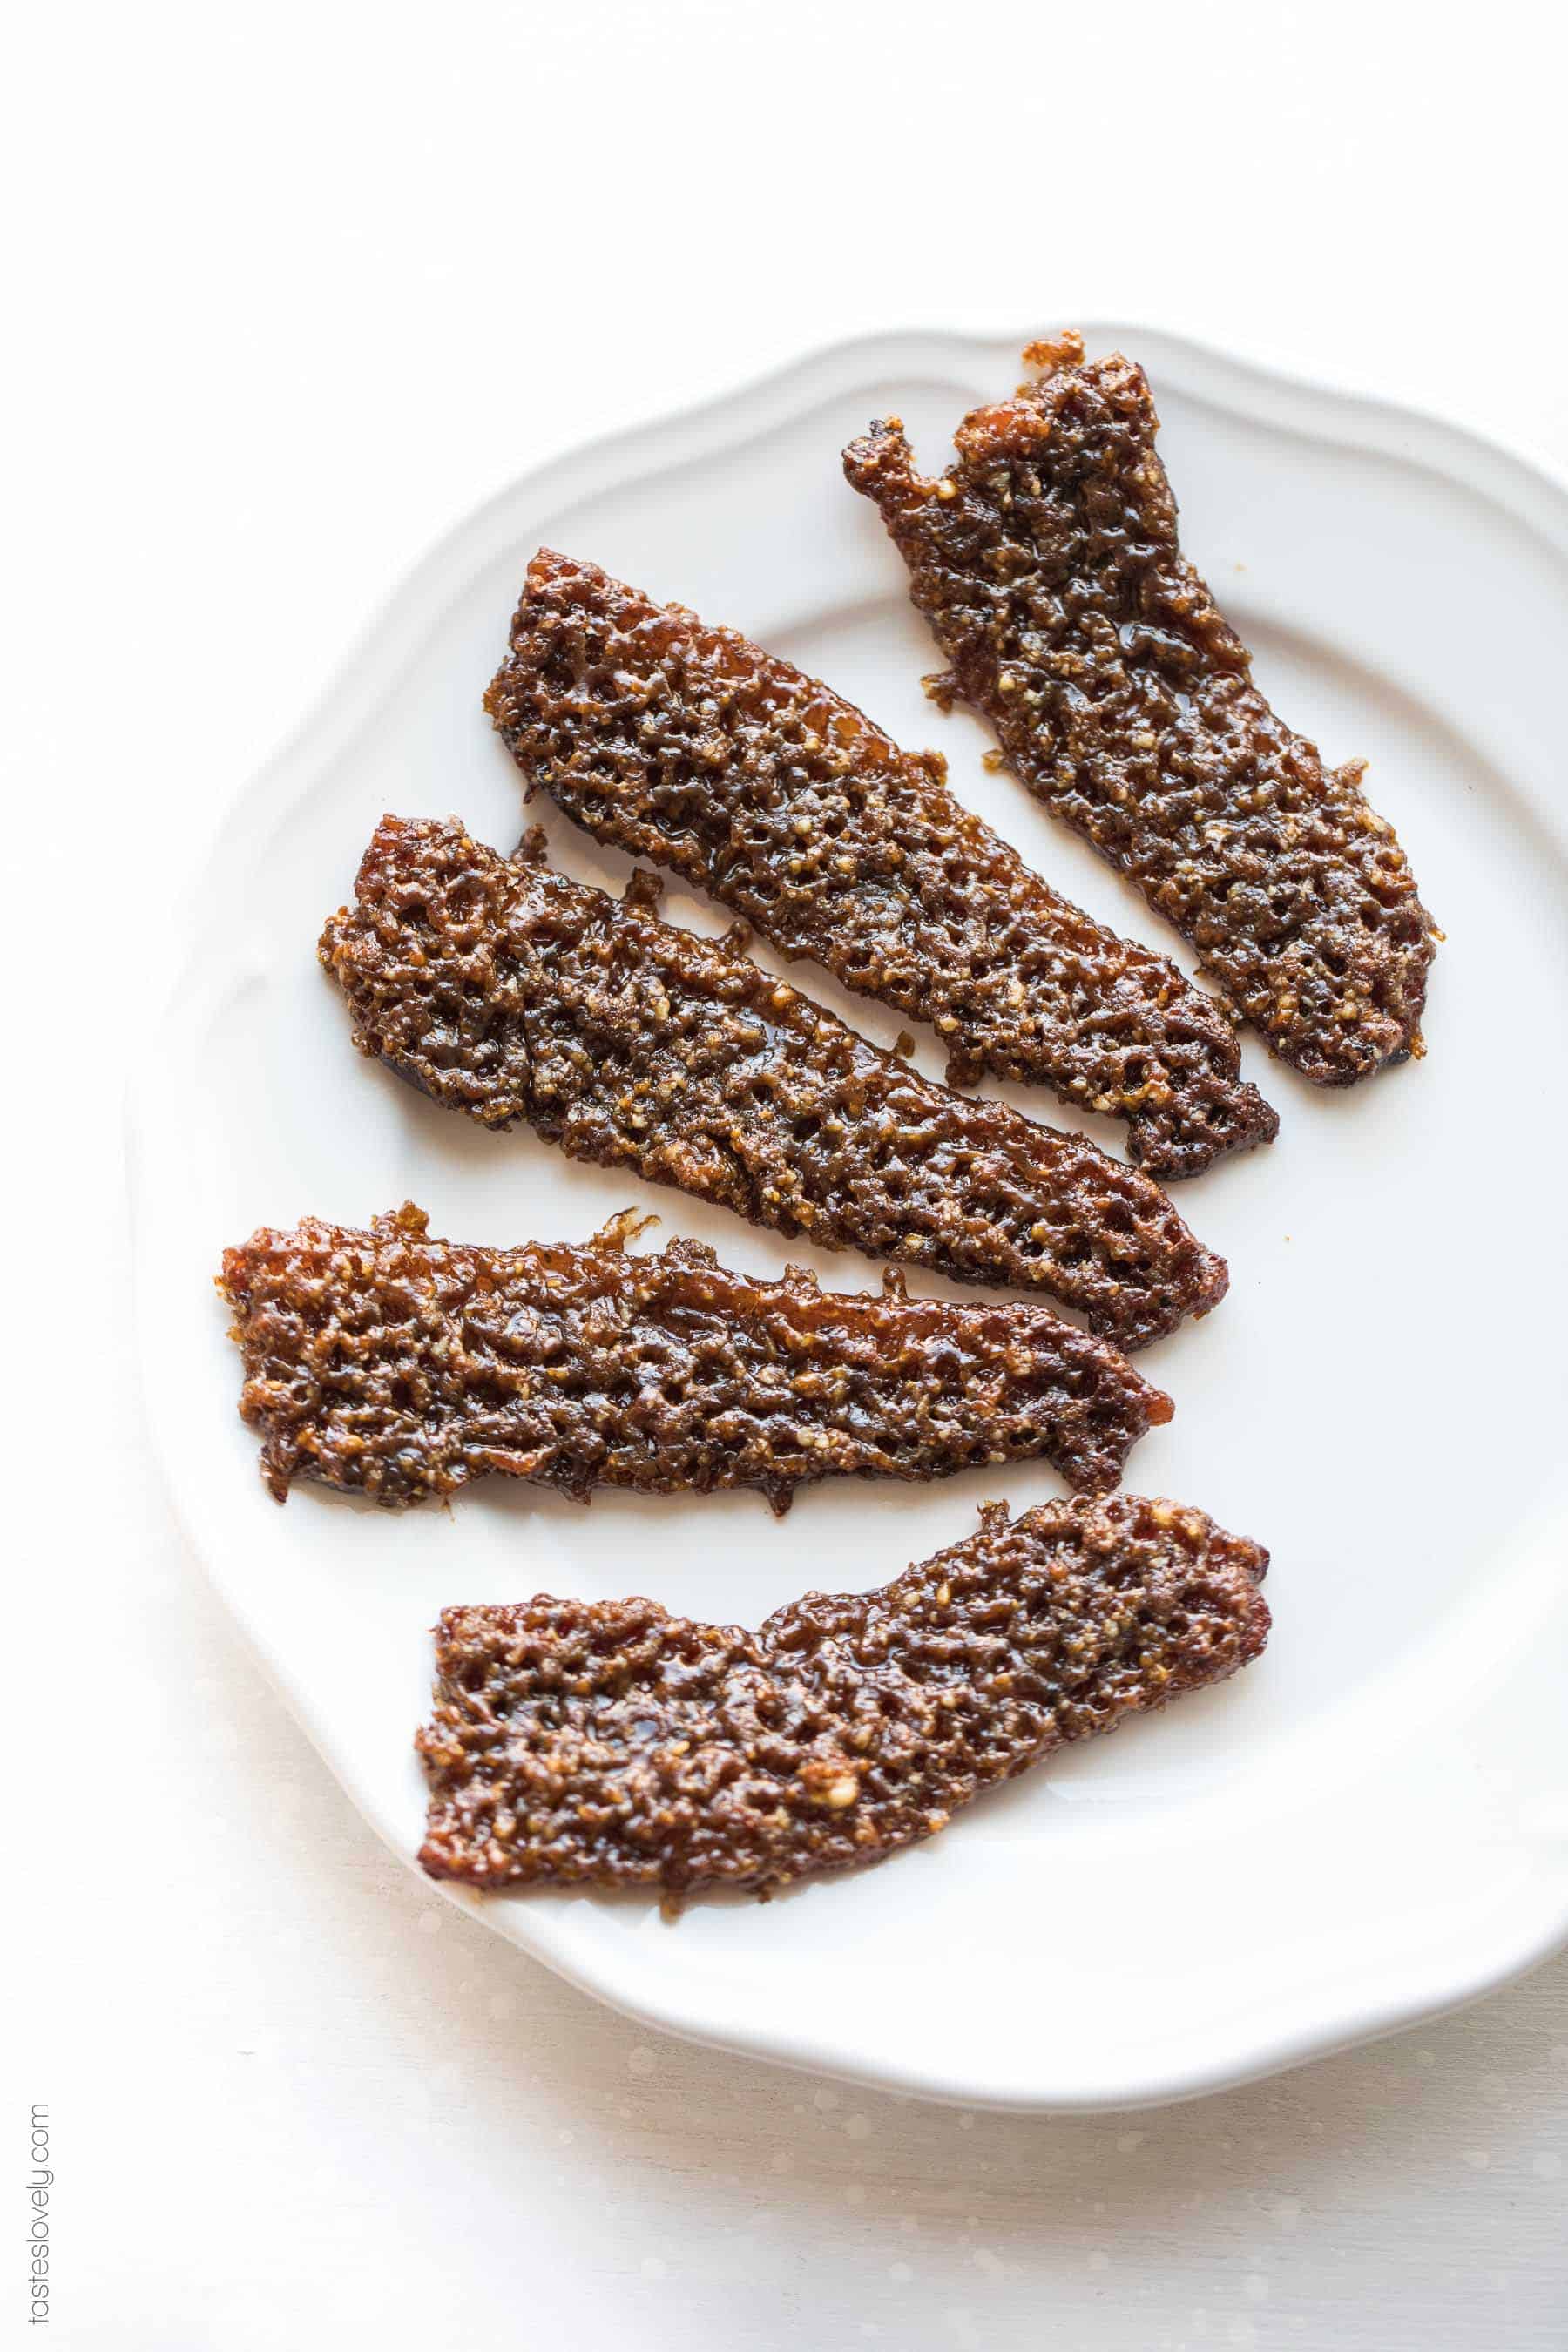 Paleo Pecan Candied Bacon - a salty + sweet brunch side or appetizer recipe (gluten free, dairy free, refined sugar free)